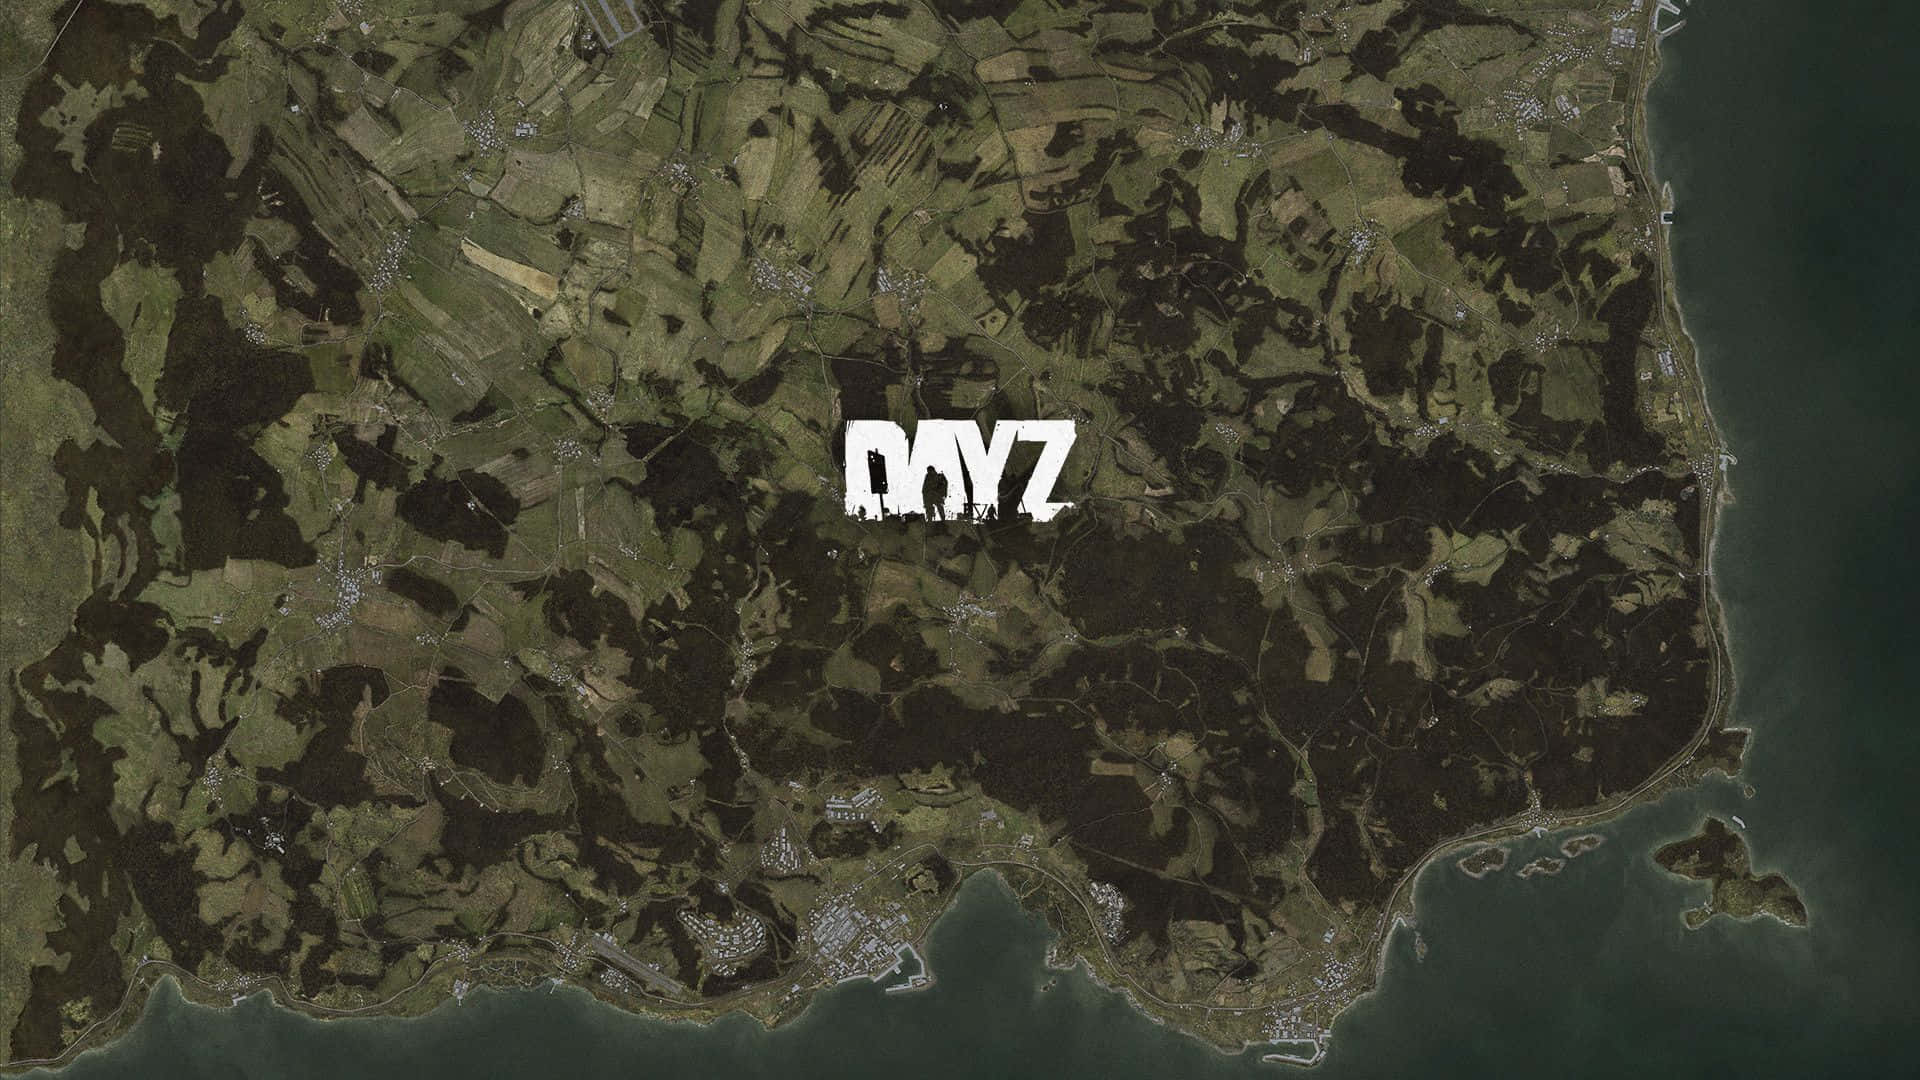 A Map With The Word N7 On It